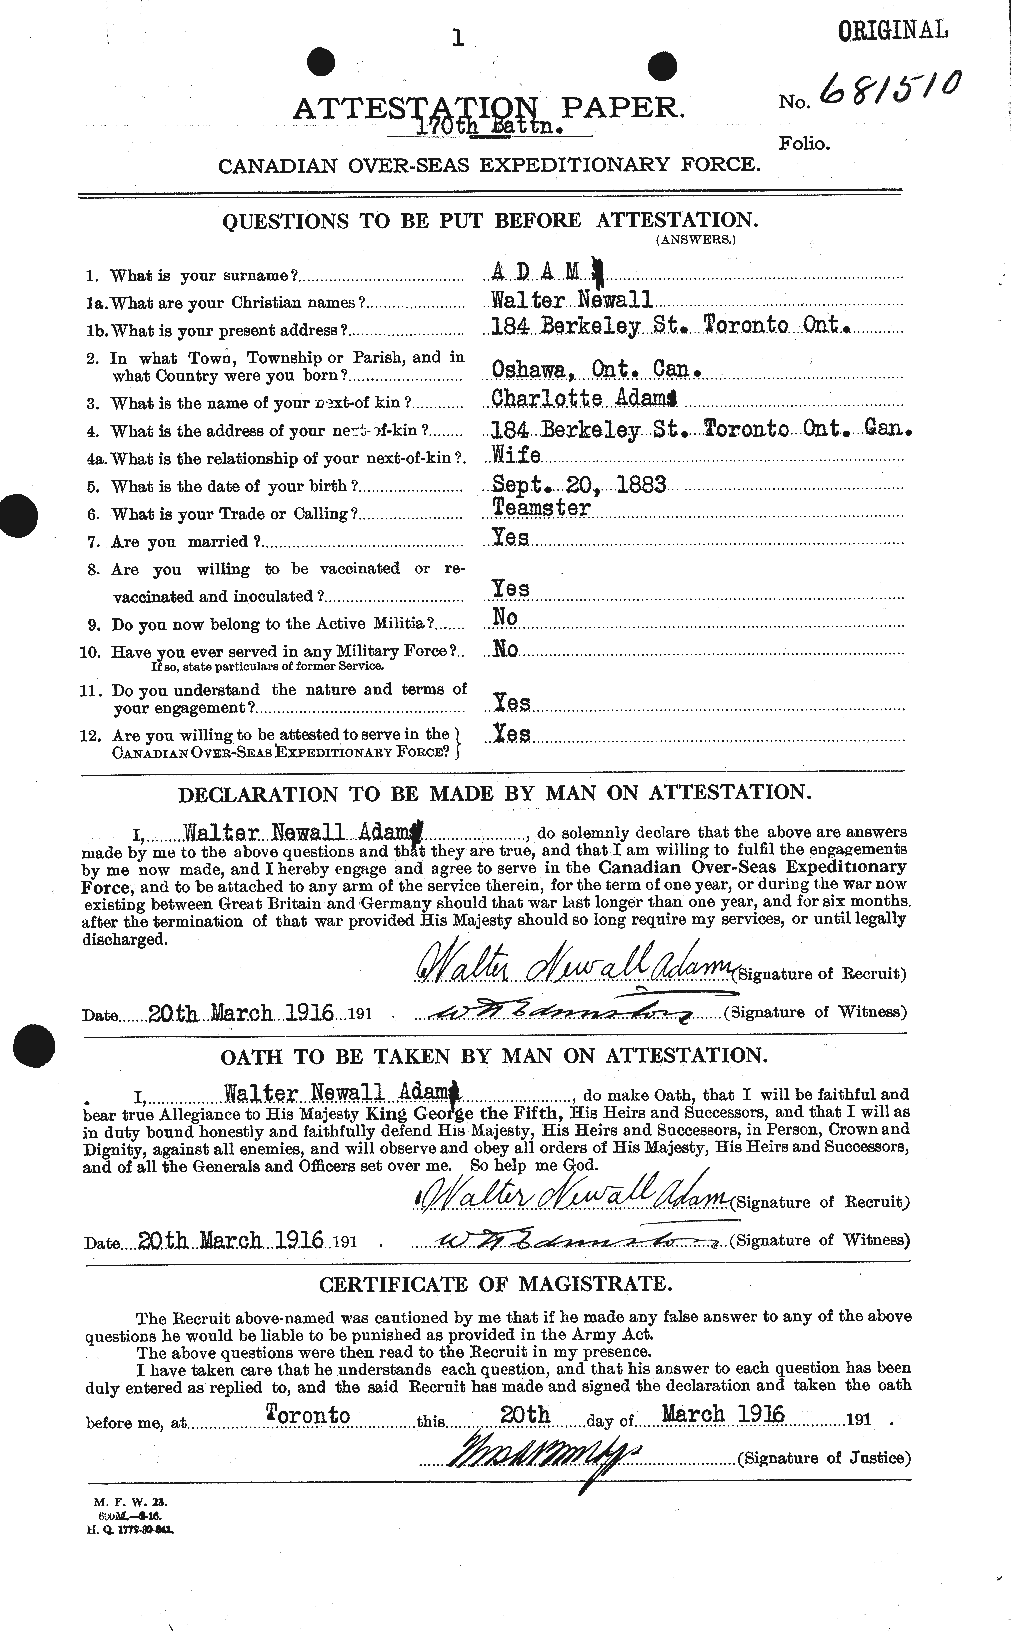 Personnel Records of the First World War - CEF 201325a